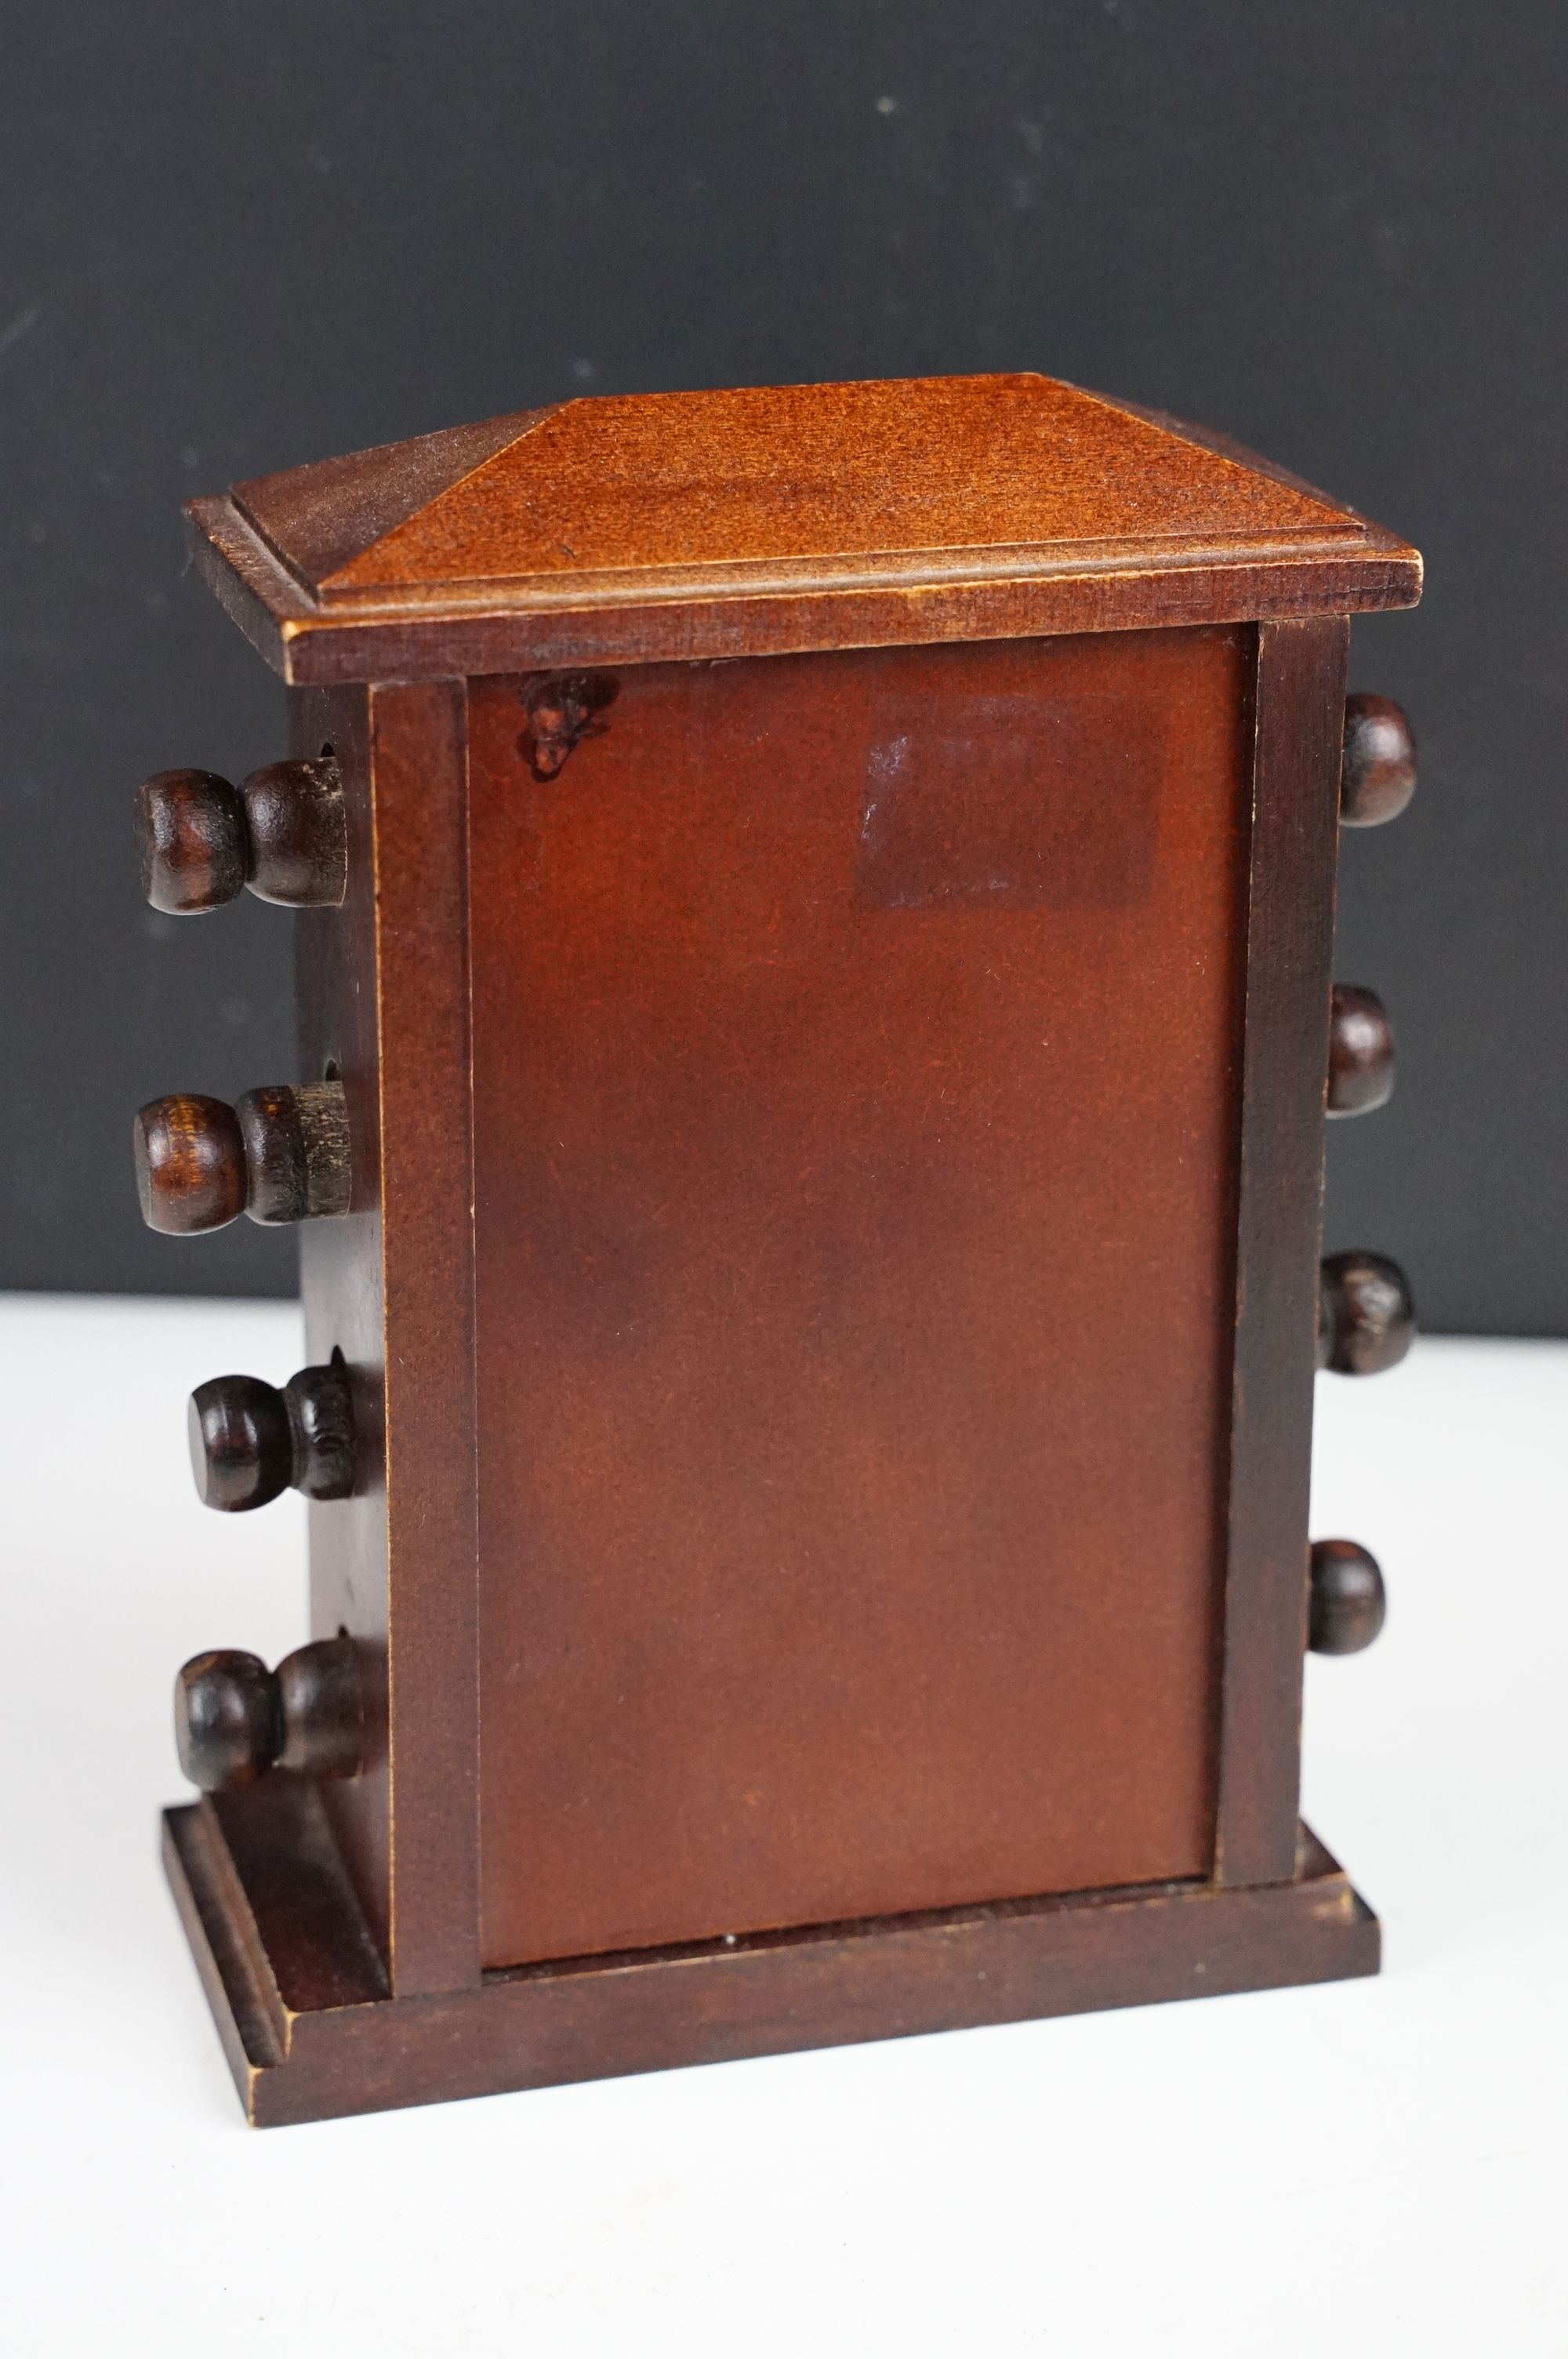 Edwardian style Wooden Cased Perpetual Desk Calendar, 18cm high - Image 4 of 5